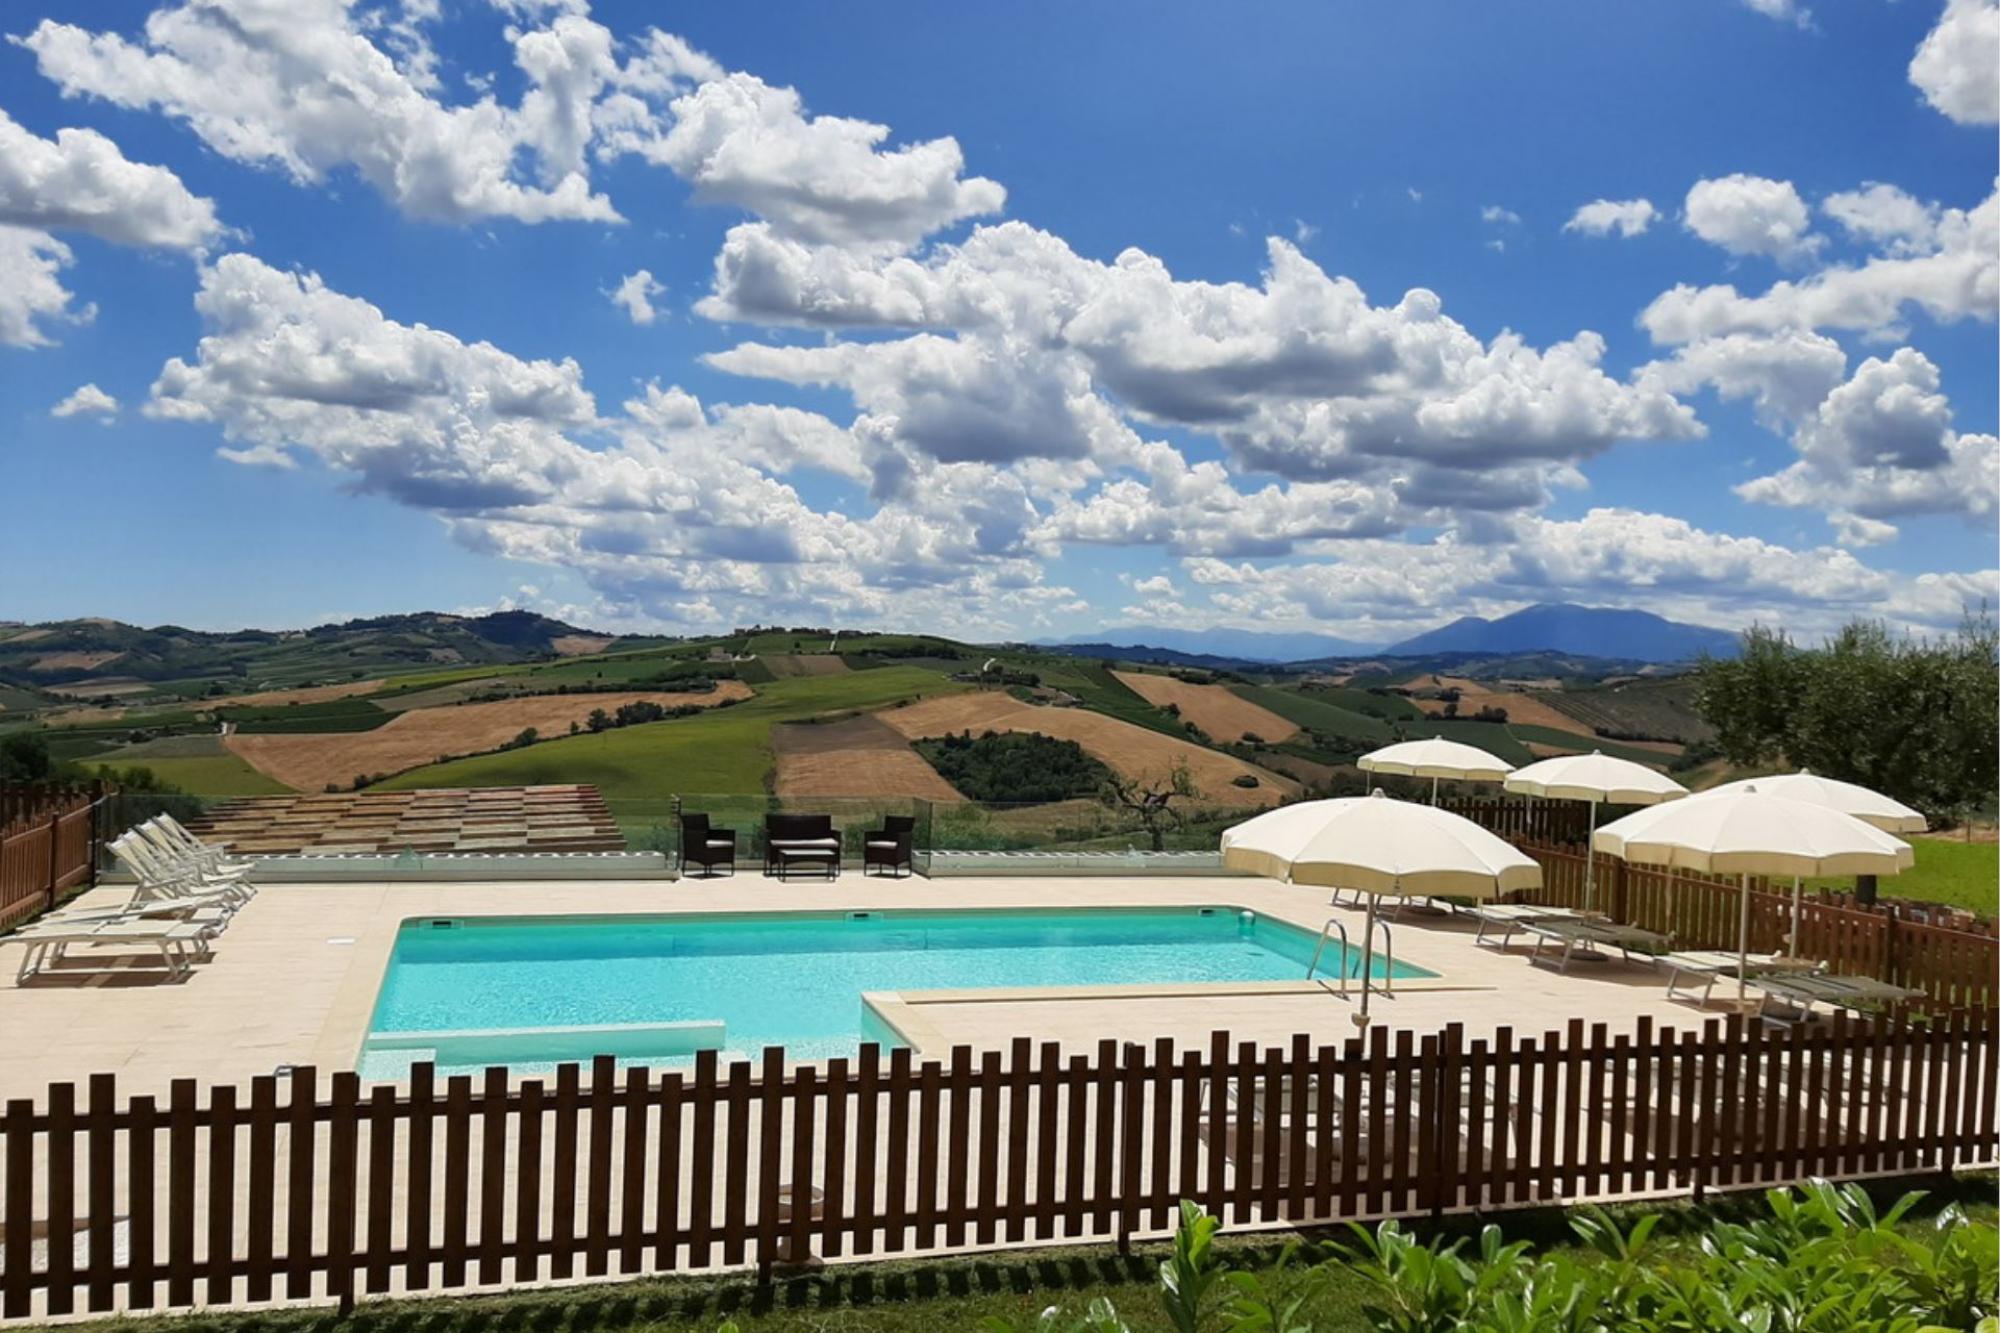 Property Image 1 - Villa with stunning views and private pool-Villa Matilde